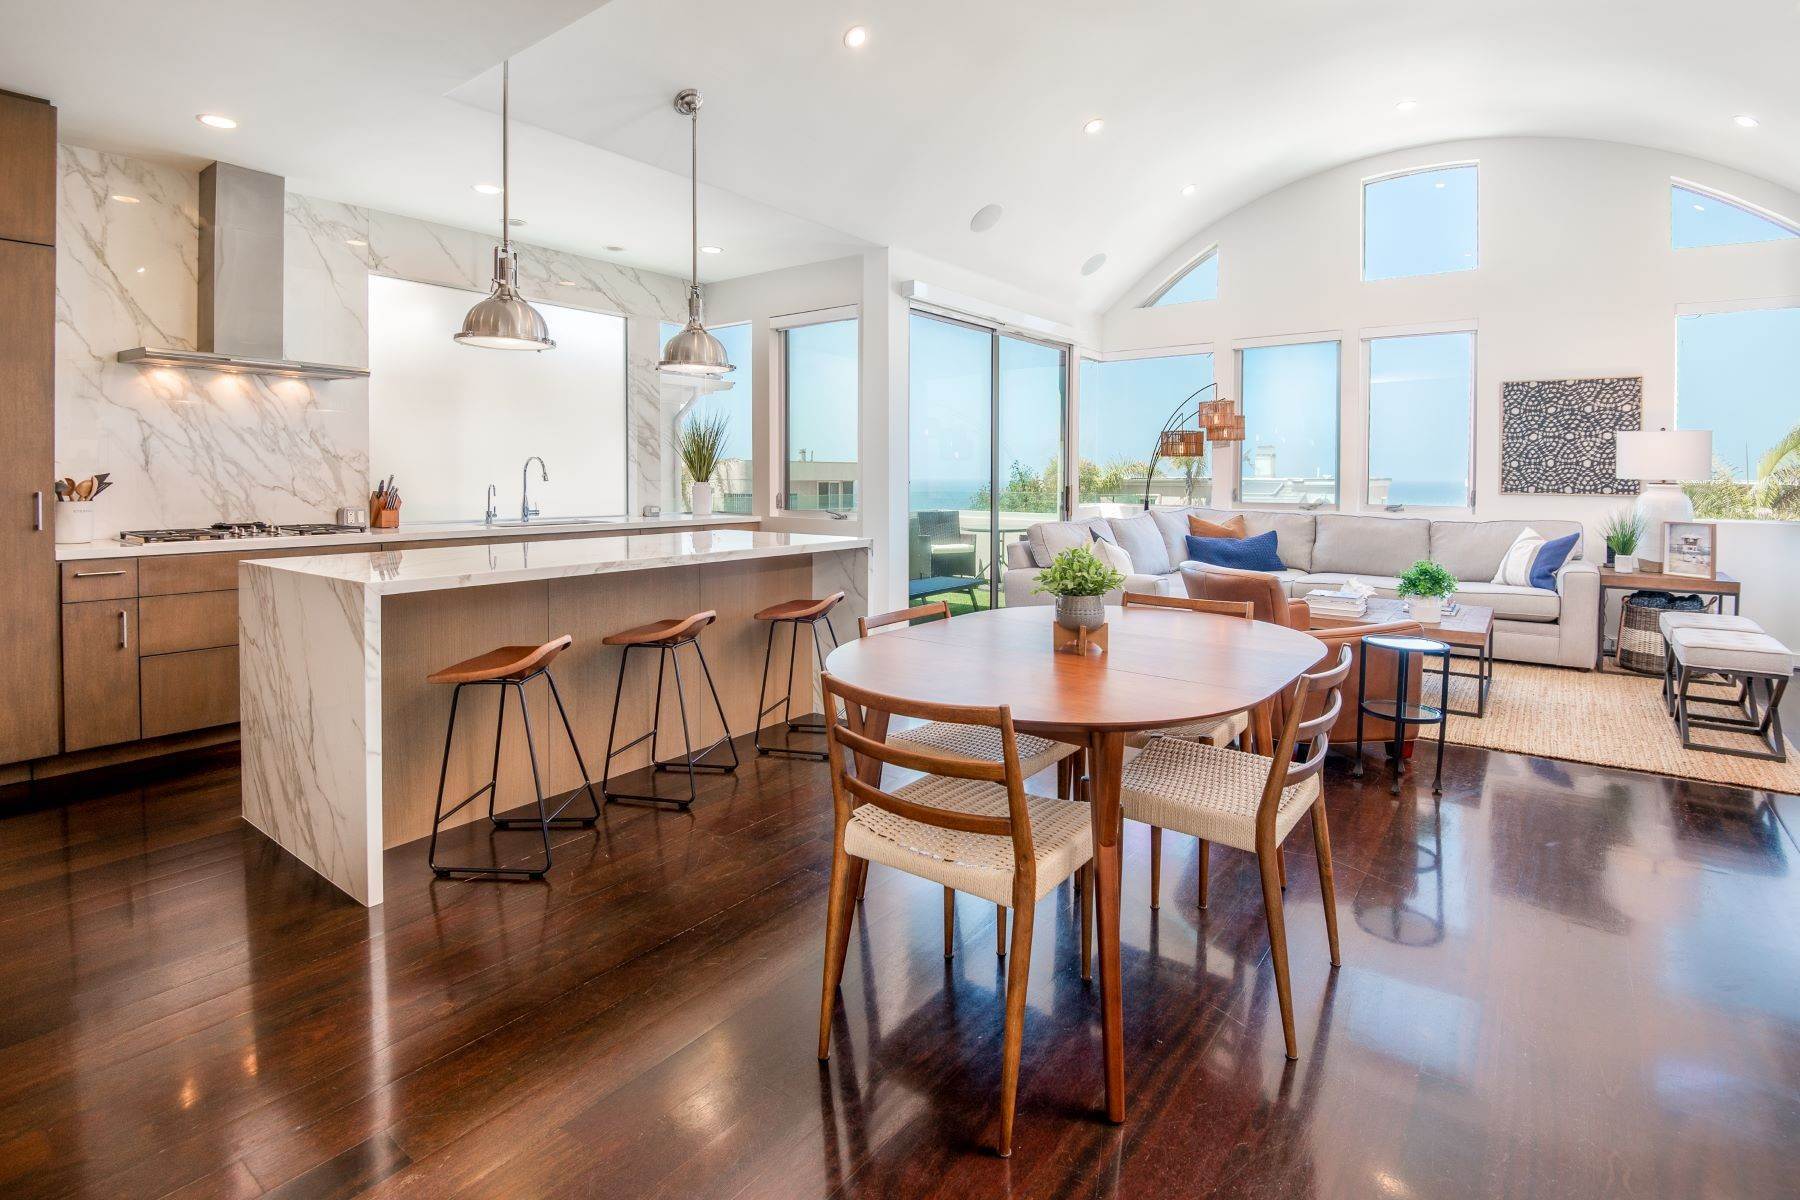 Single Family Homes for Sale at 2804 Highland Avenue, Manhattan Beach, CA 90266 2804 Highland Avenue, Manhattan Beach, CA 90266, Manhattan Beach, California 90266 United States